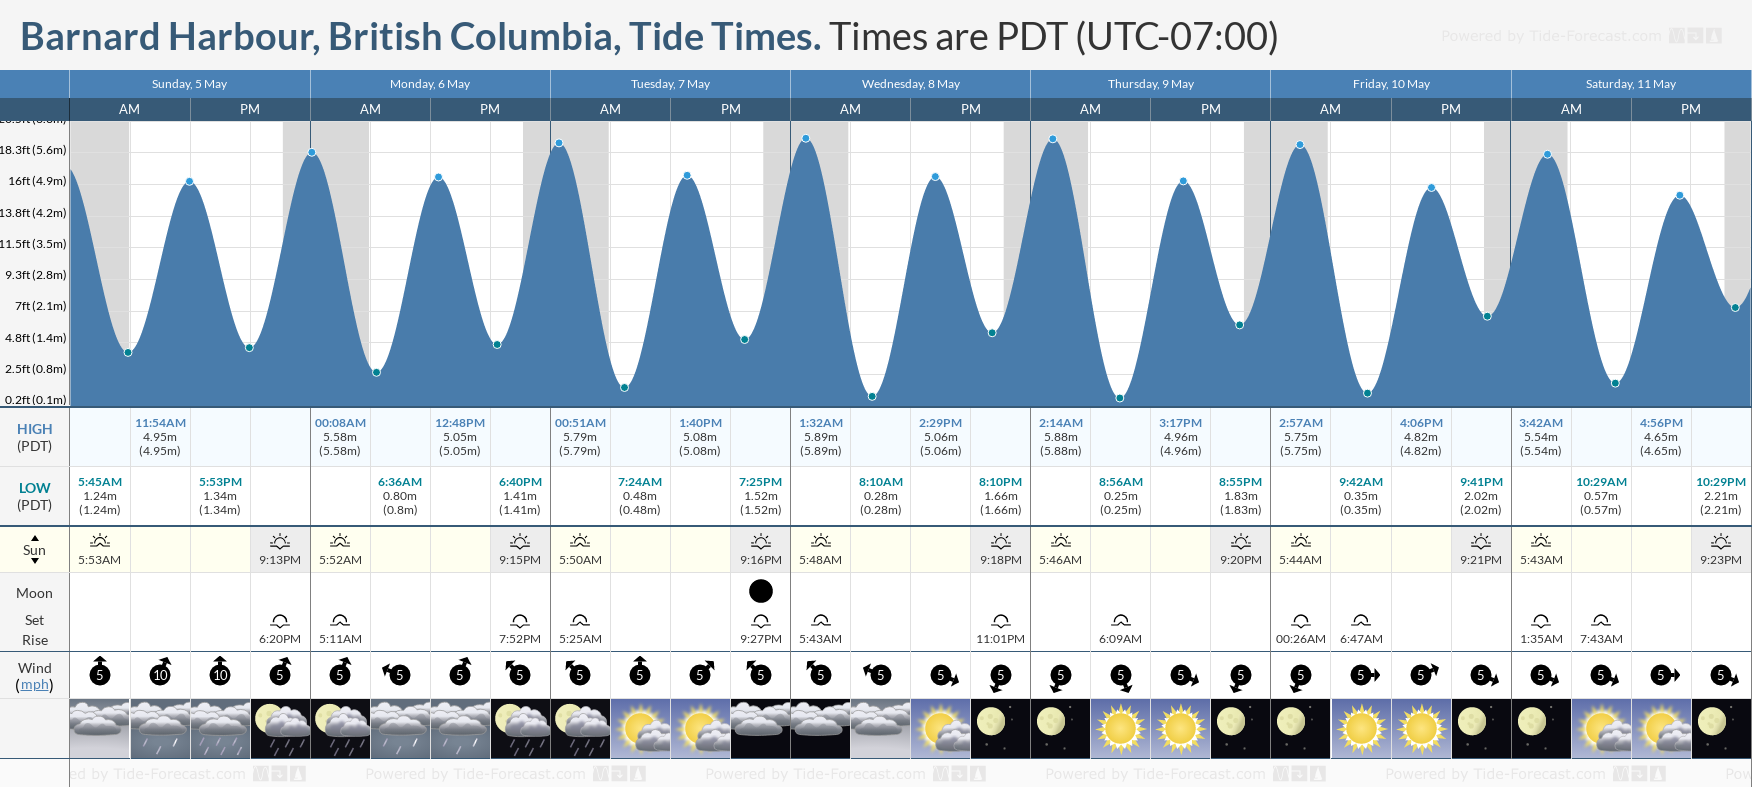 Barnard Harbour, British Columbia Tide Chart including high and low tide tide times for the next 7 days